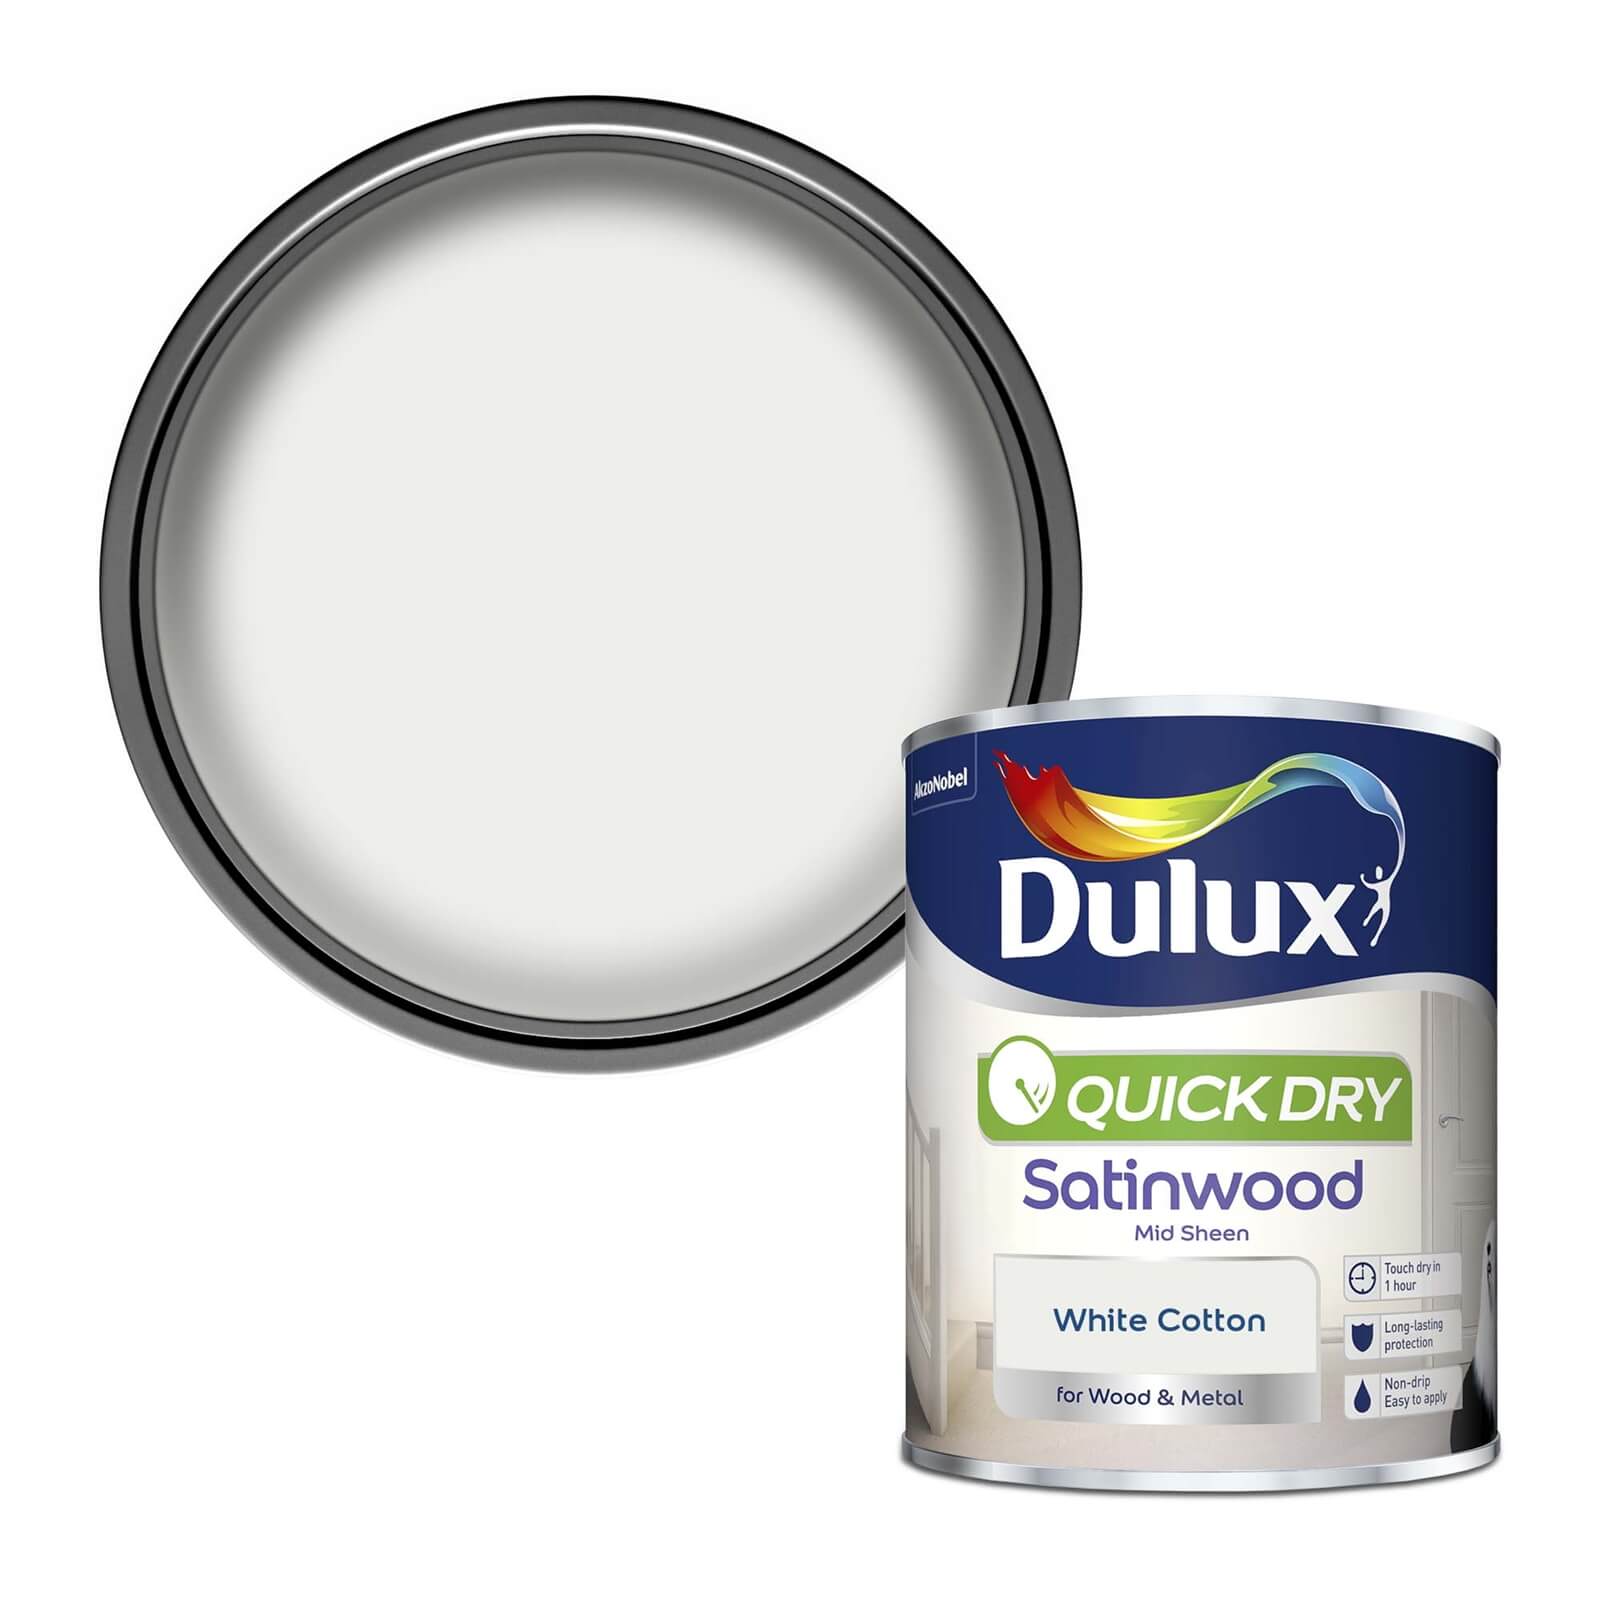 Photo of Dulux White Cotton - Quick Dry Satinwood - 750ml